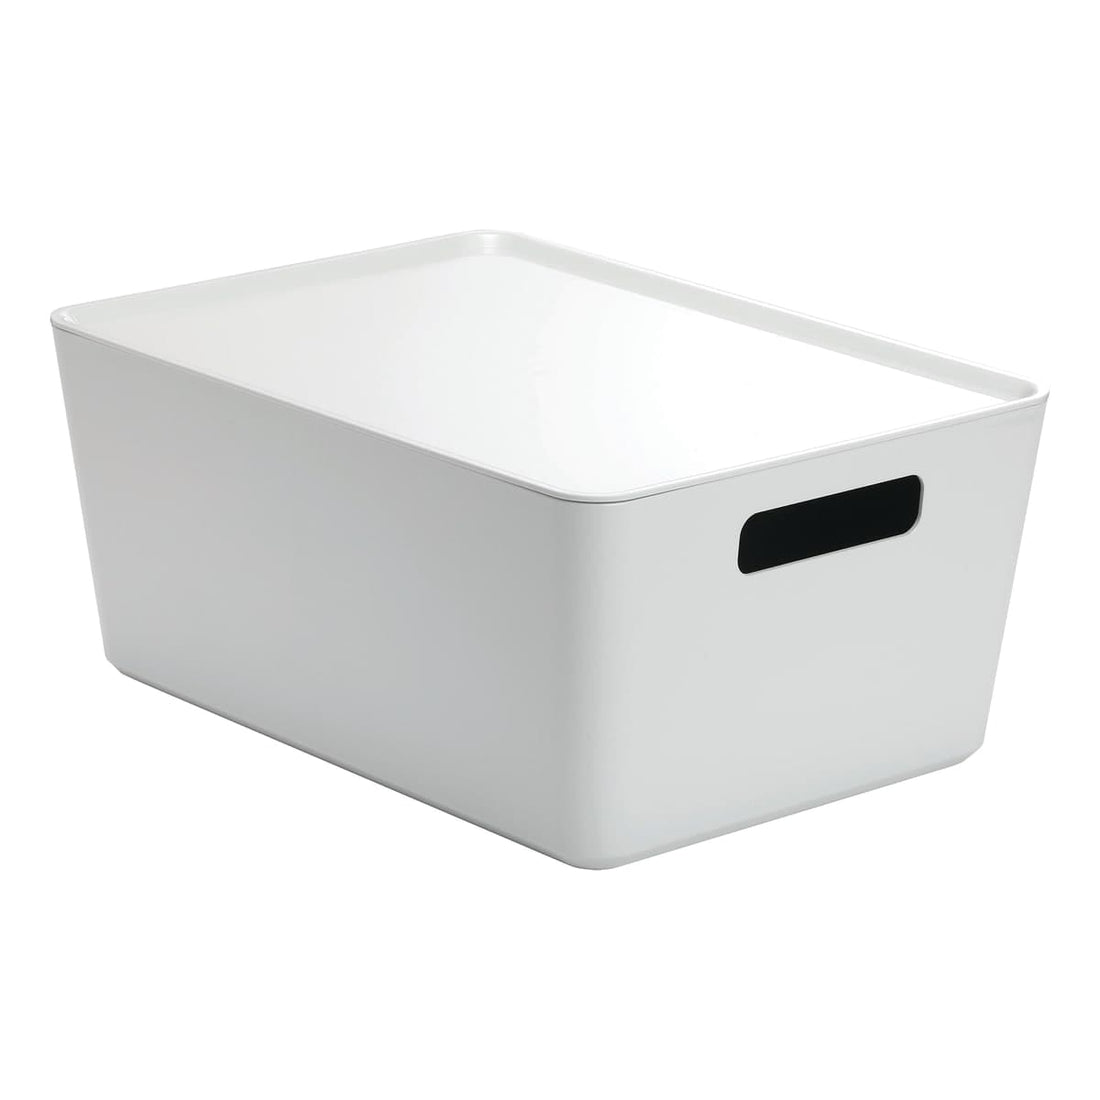 CONTAINER WITH LID R-BOX1 LARGE WHITE 33X24X14 CM - best price from Maltashopper.com BR410006634